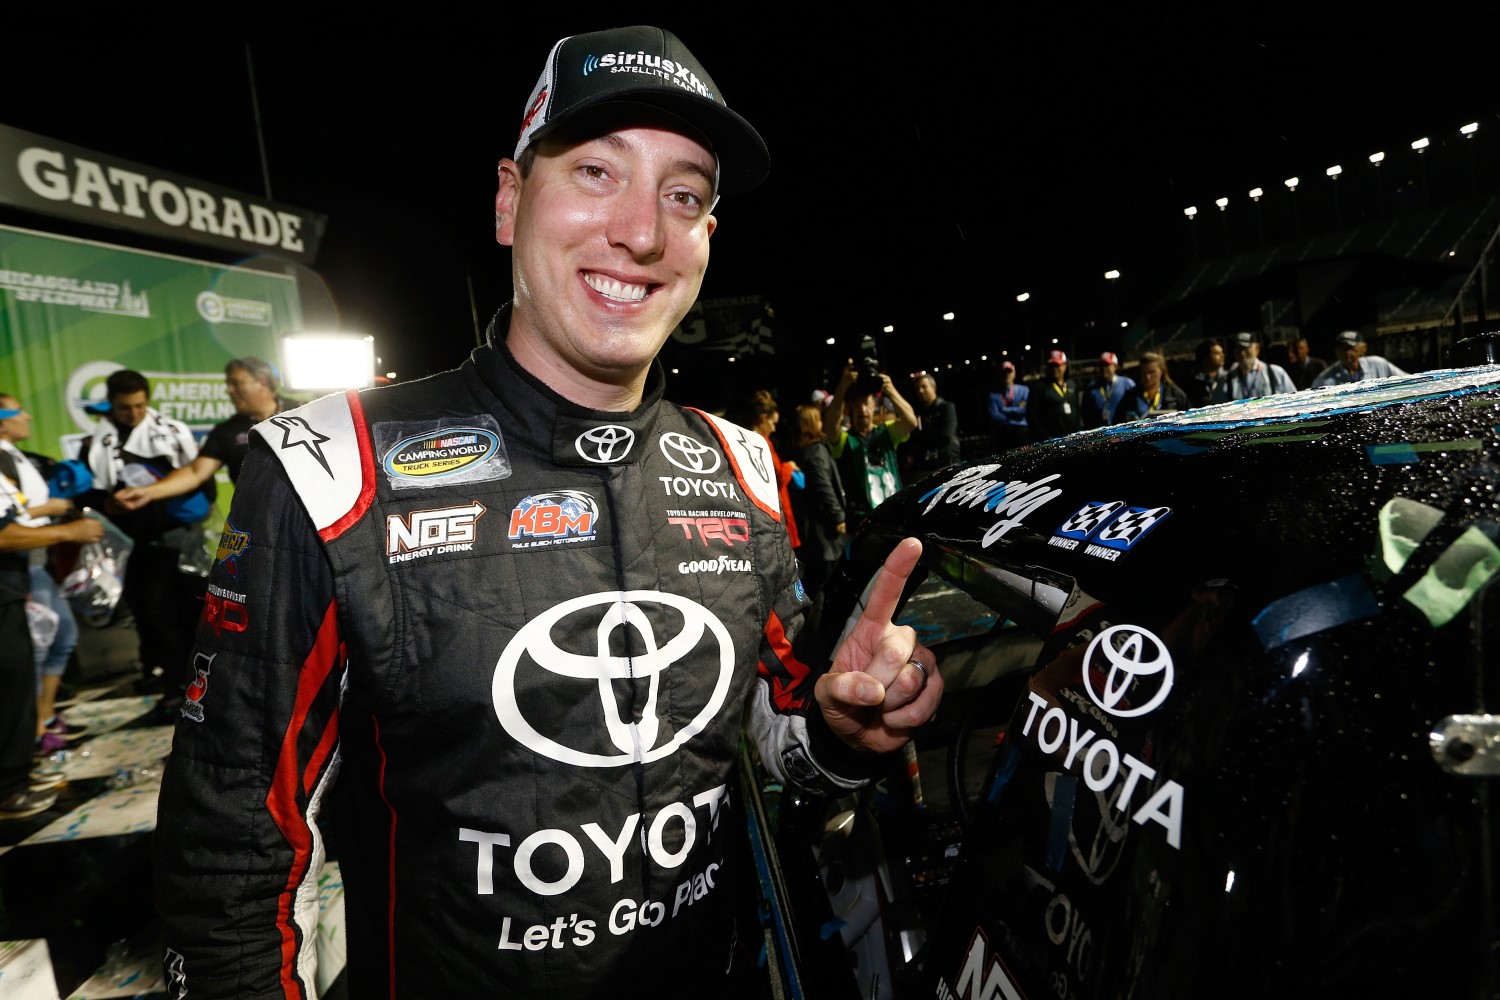 Kyle Busch runs in the Xfinity and Truck series to help make both more popular